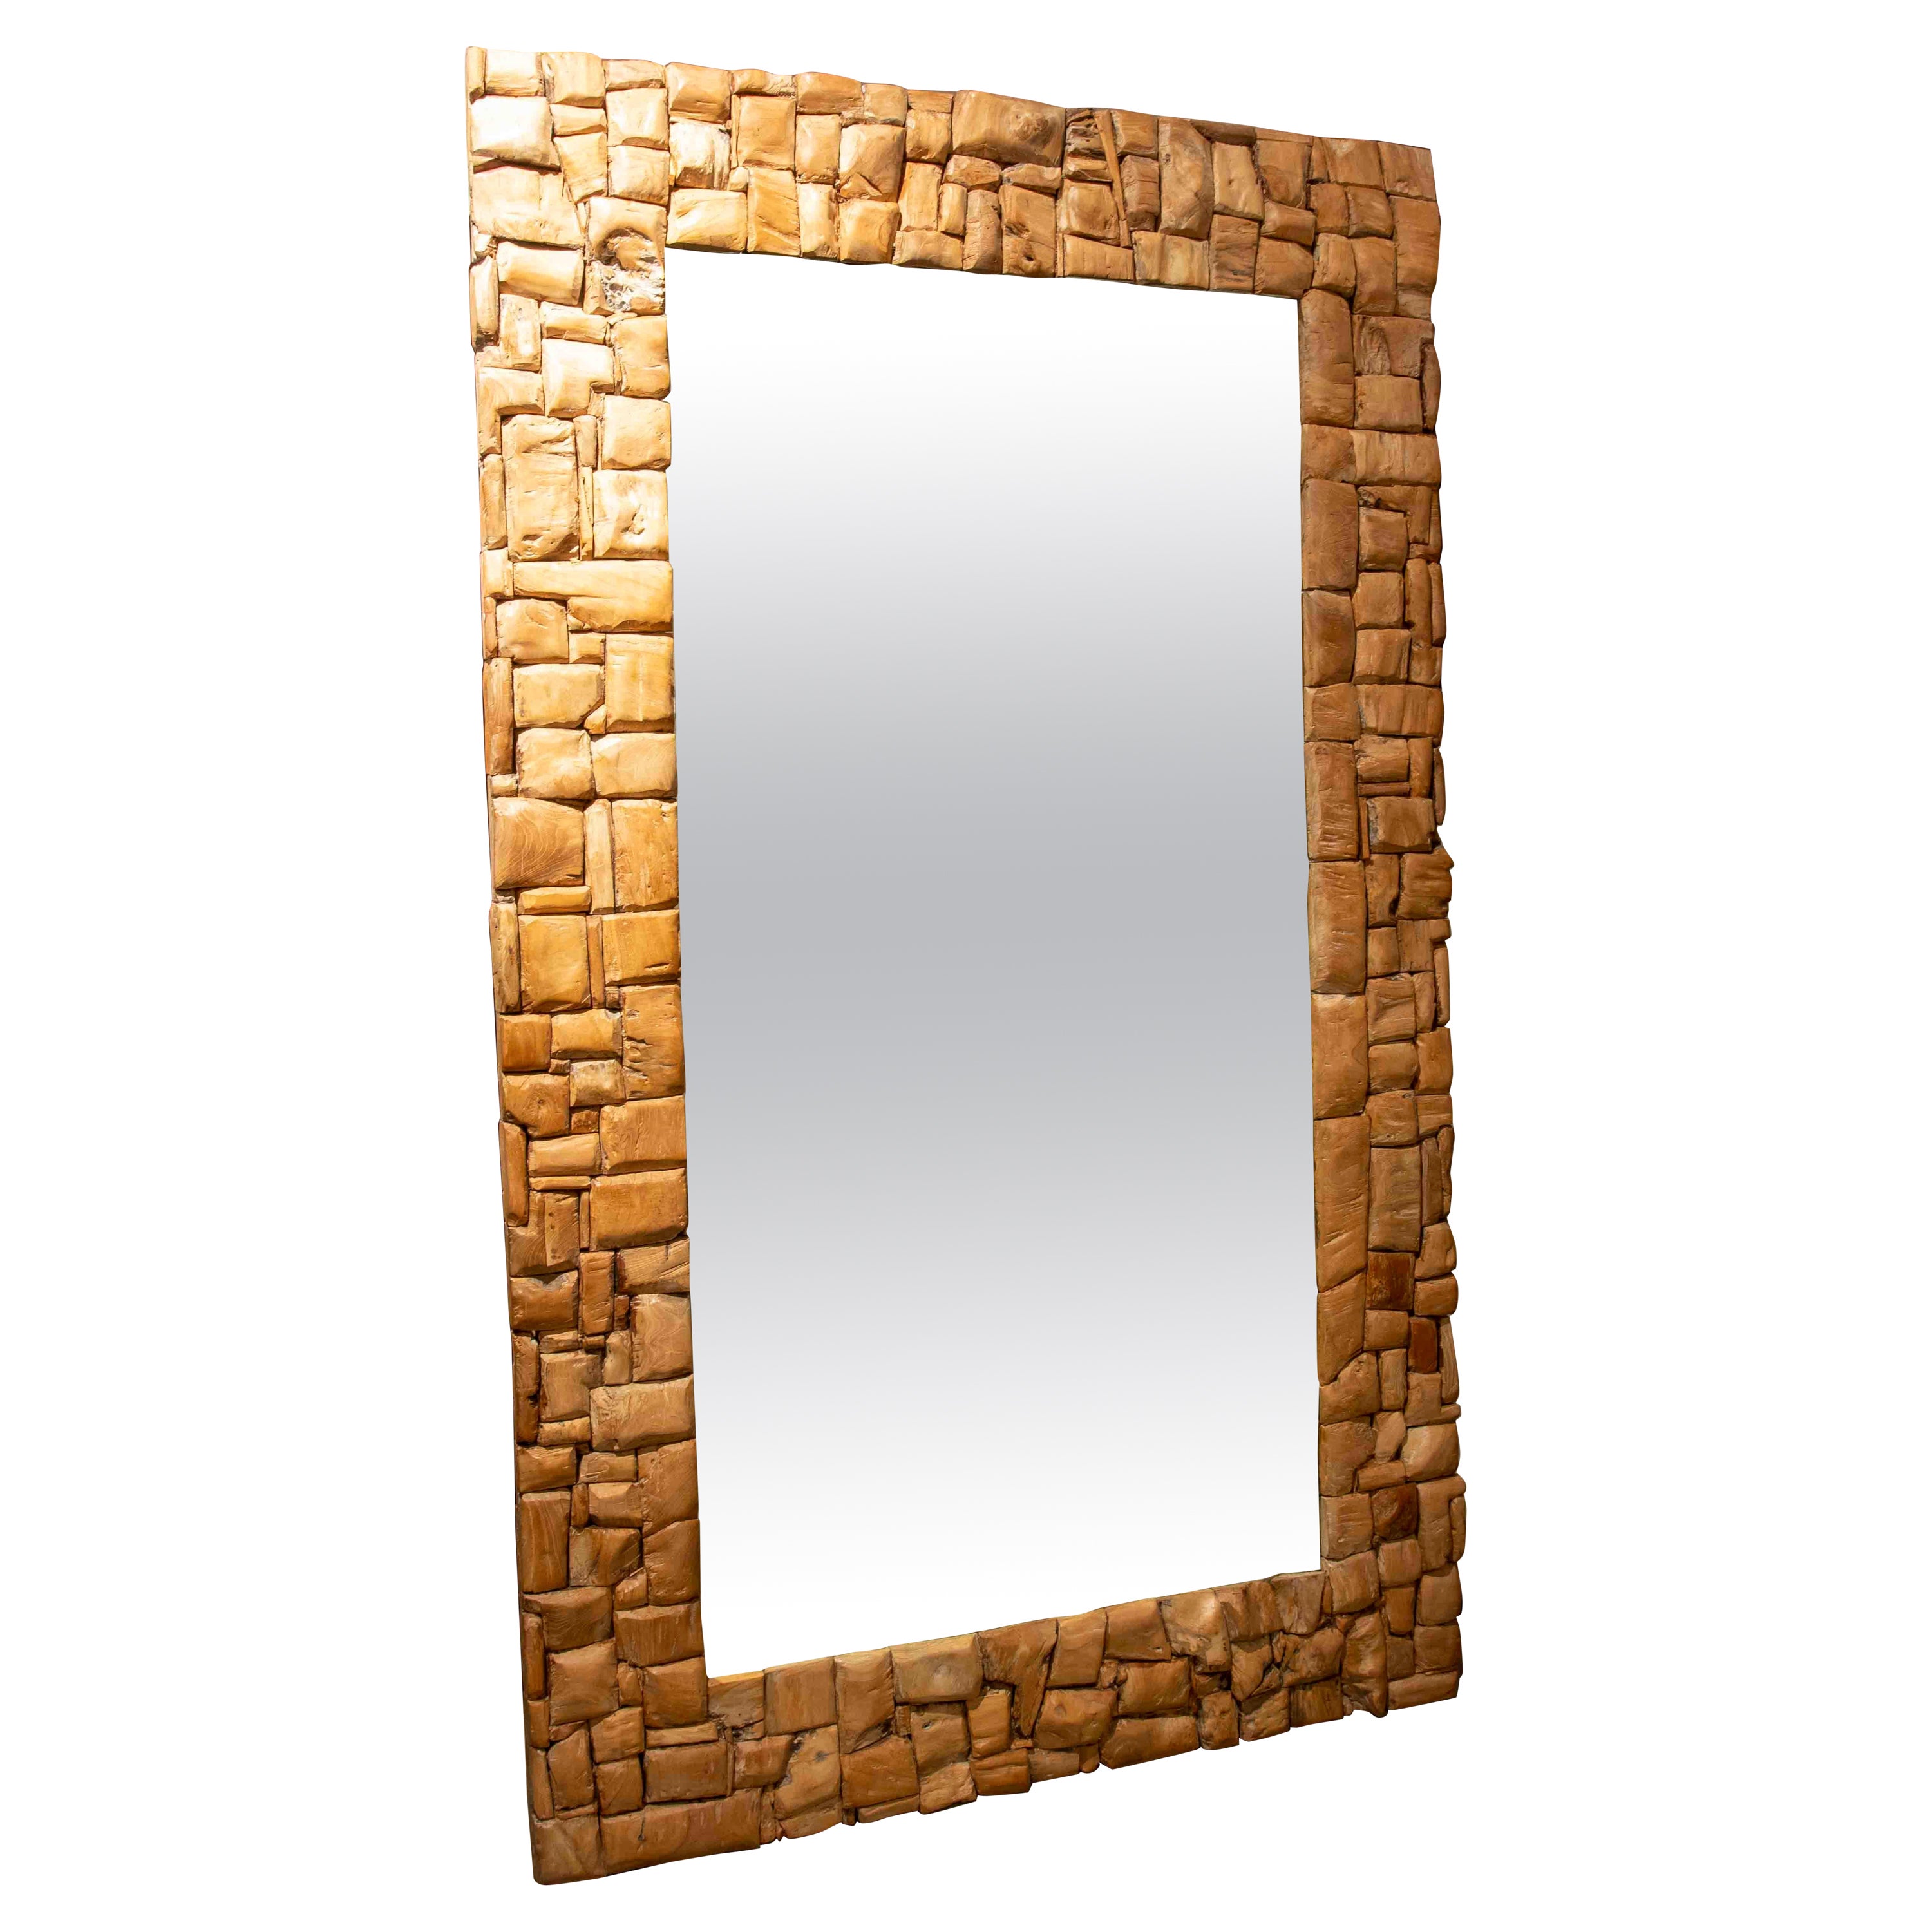 Wall Mirror Made of Wooden Pieces in Puzzle Style